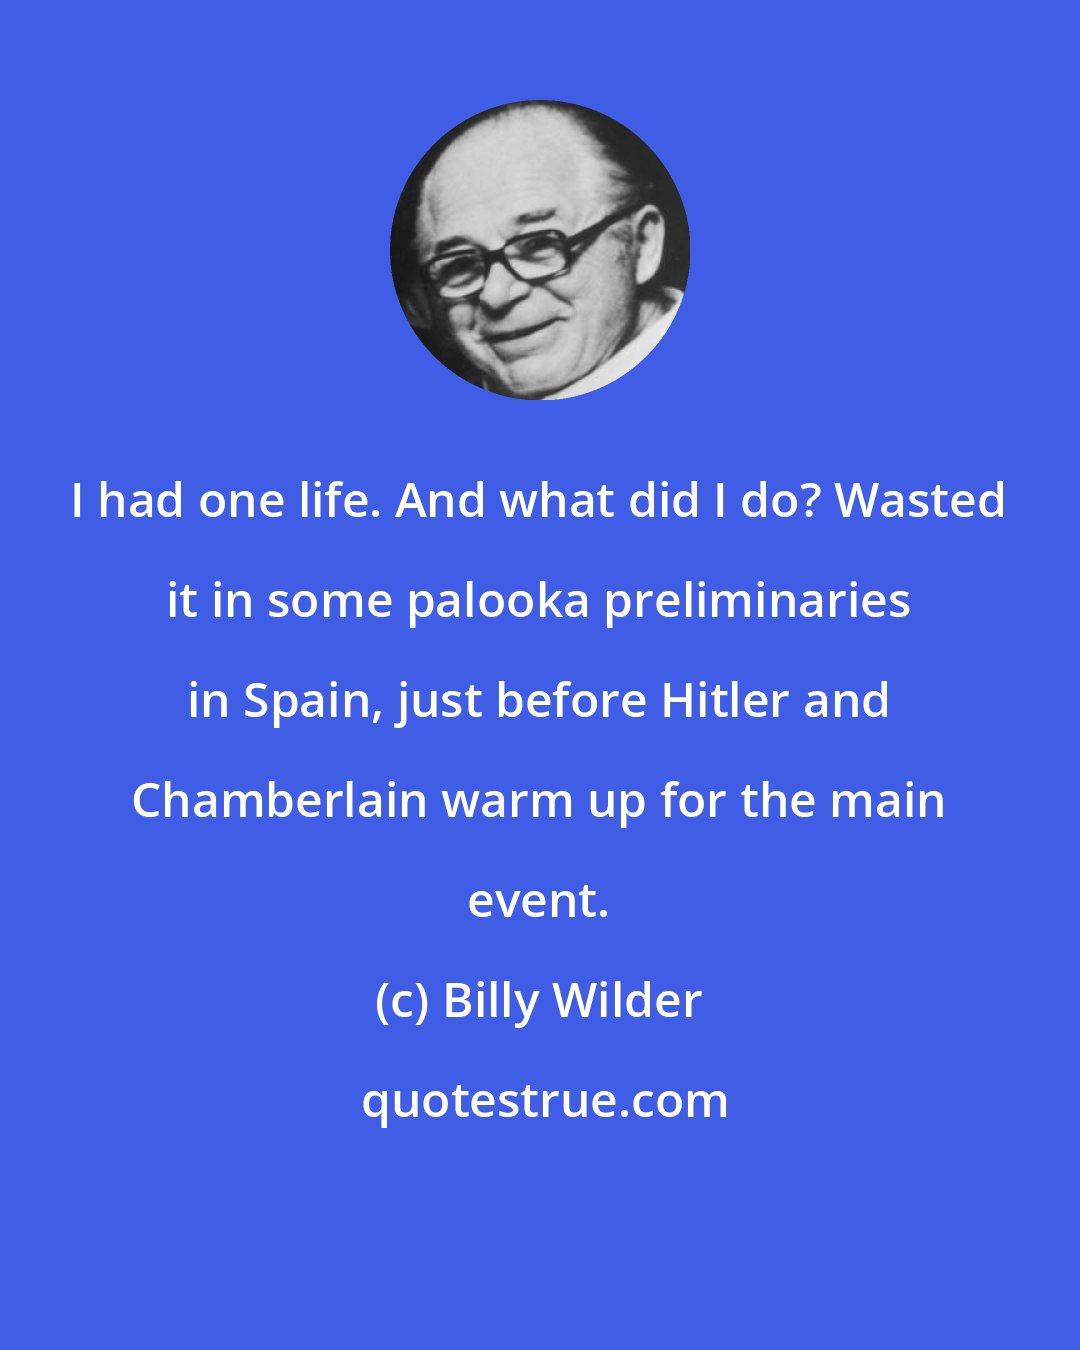 Billy Wilder: I had one life. And what did I do? Wasted it in some palooka preliminaries in Spain, just before Hitler and Chamberlain warm up for the main event.